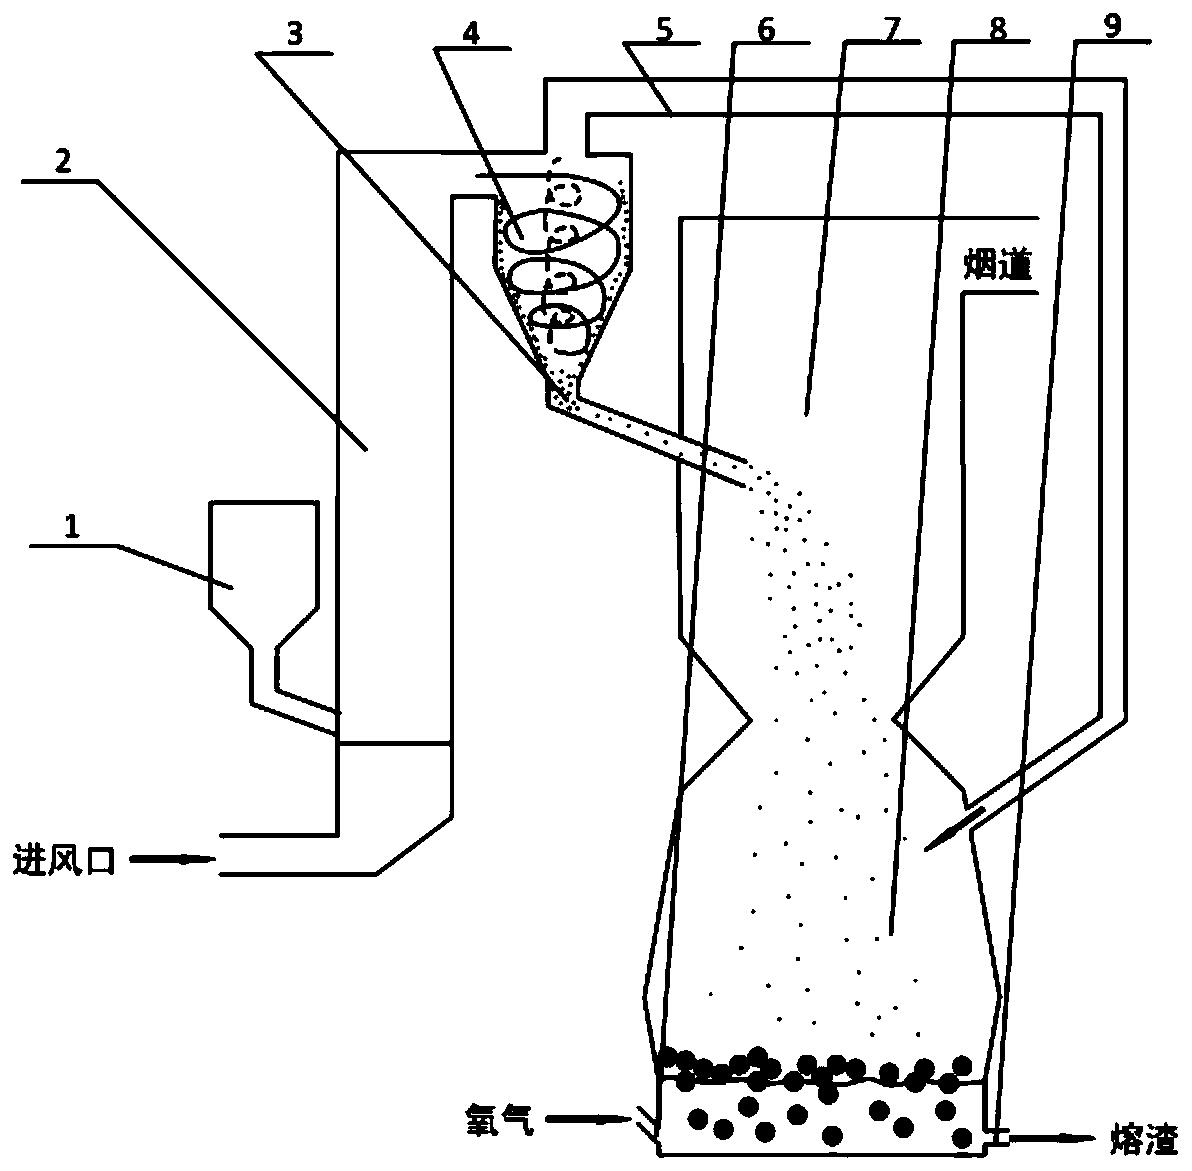 A uniform and continuous feeding device for waste incineration fly ash particles